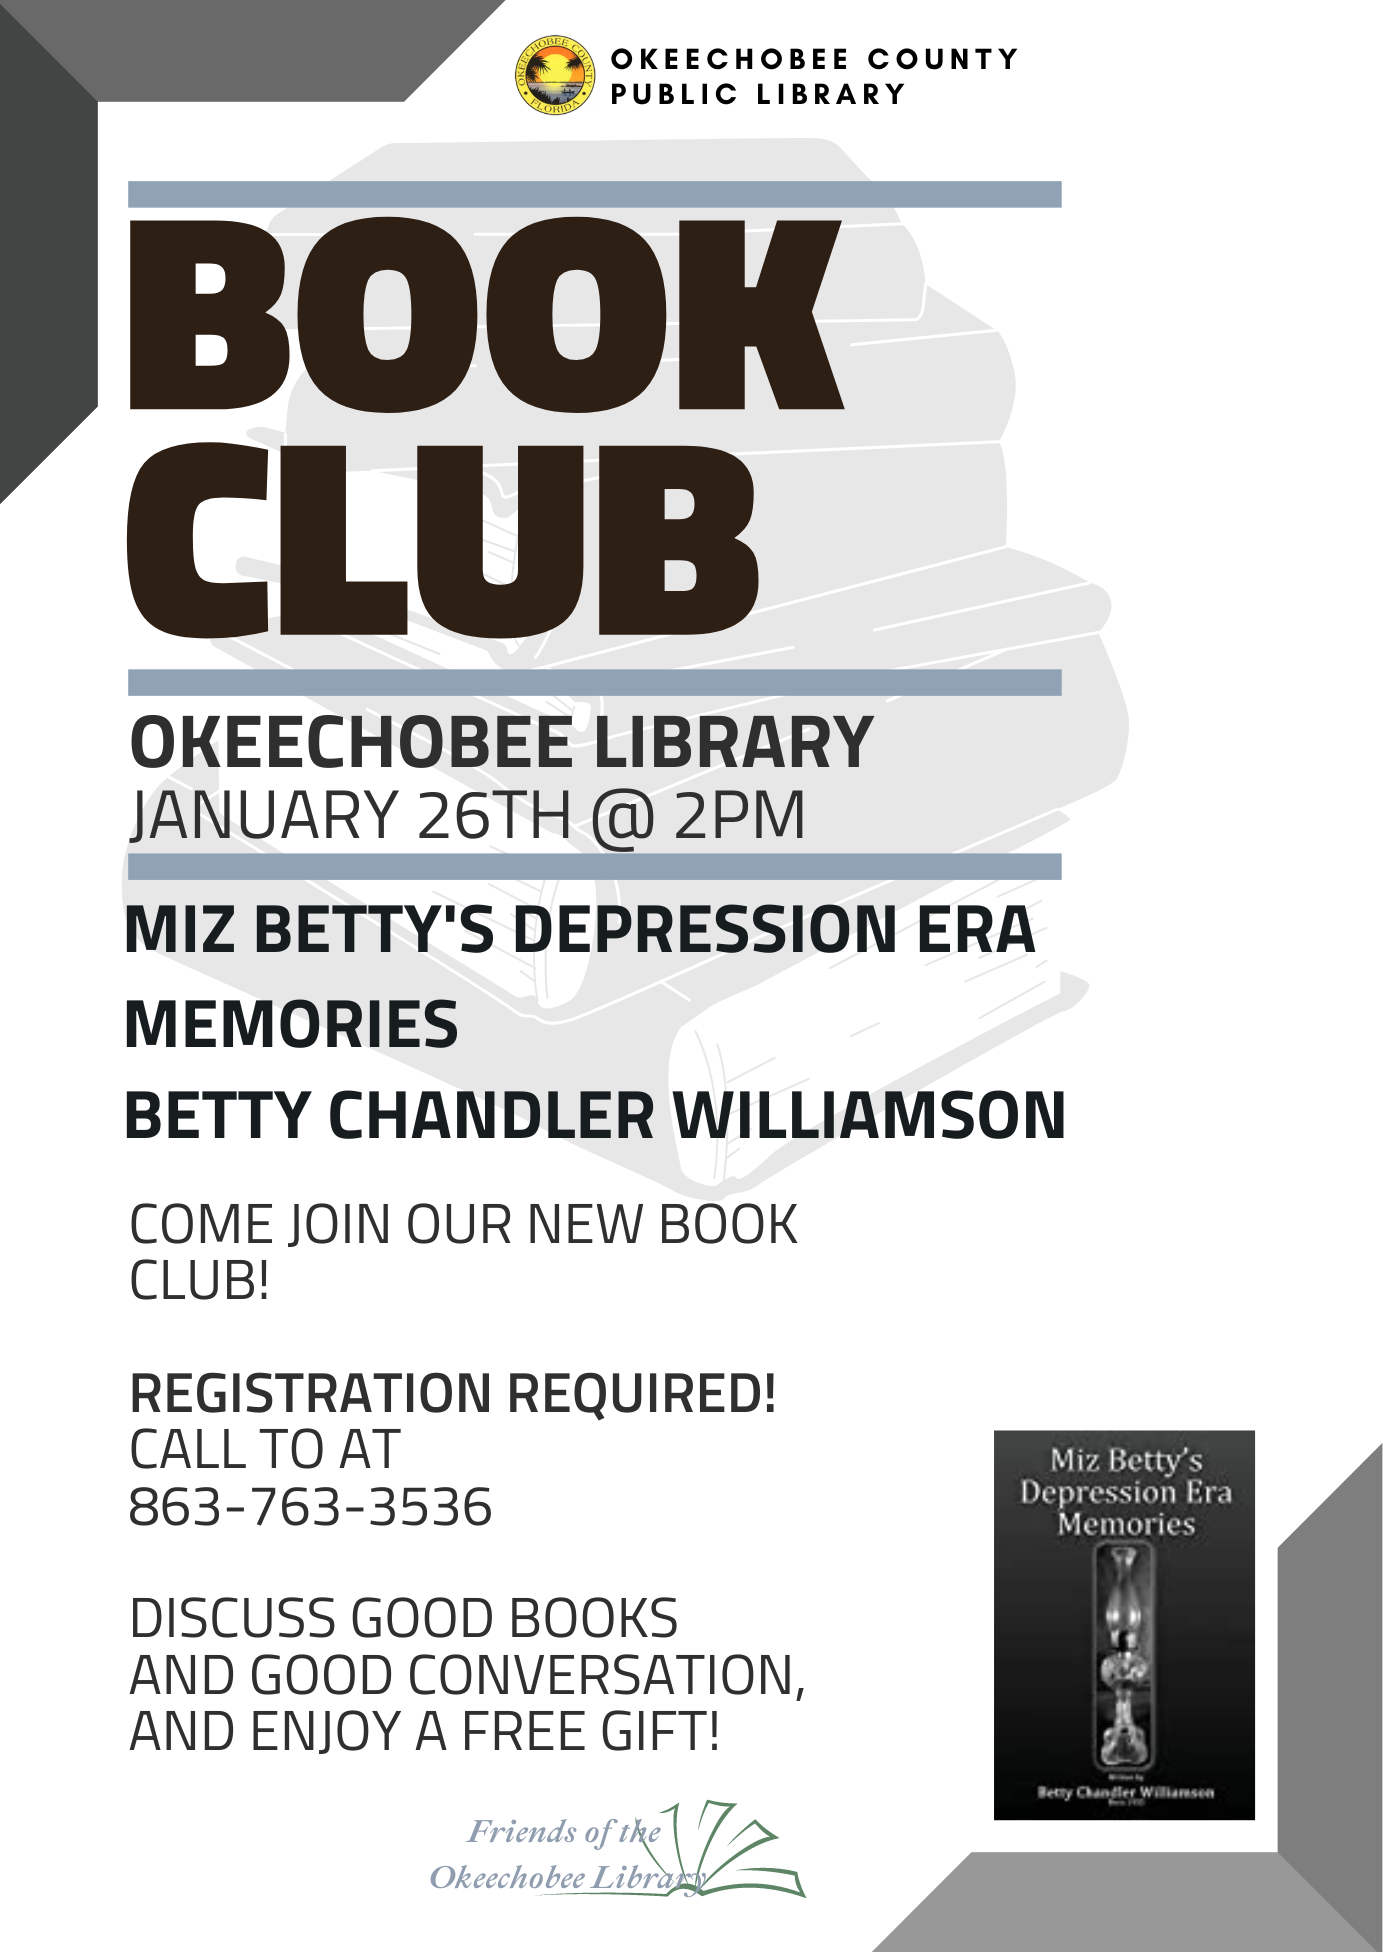 "Join us at the Okeechobee Library on Thursday, January 26th at 2pm for Book Club! This month we will be discussing 'Miz Betty's Depression Era Memories' by Betty Chandler Williamson. Also every month we have a small FREE gift bag for attendees!"